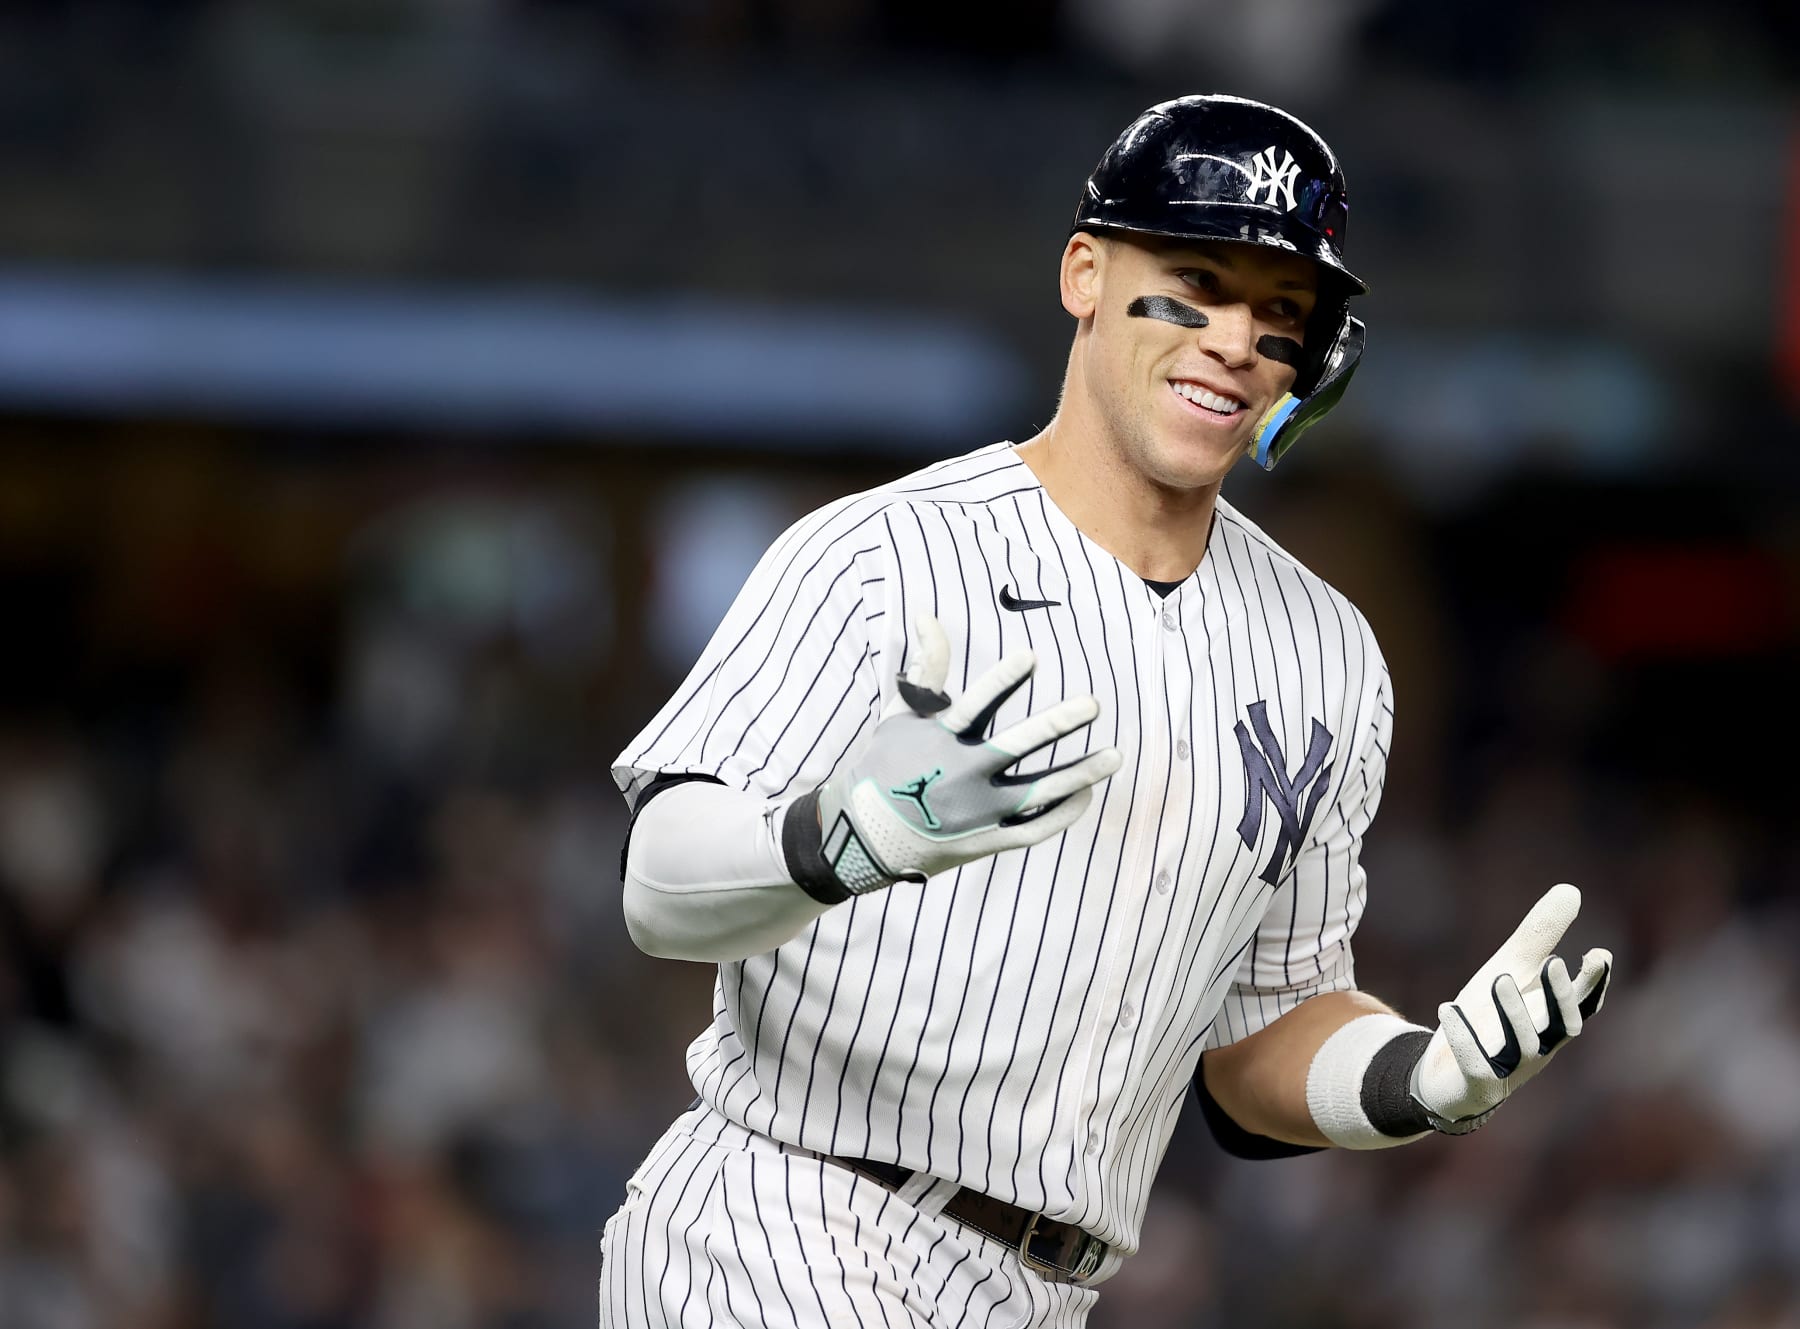 Highlight] Aaron Judge lines his second home run of the season to